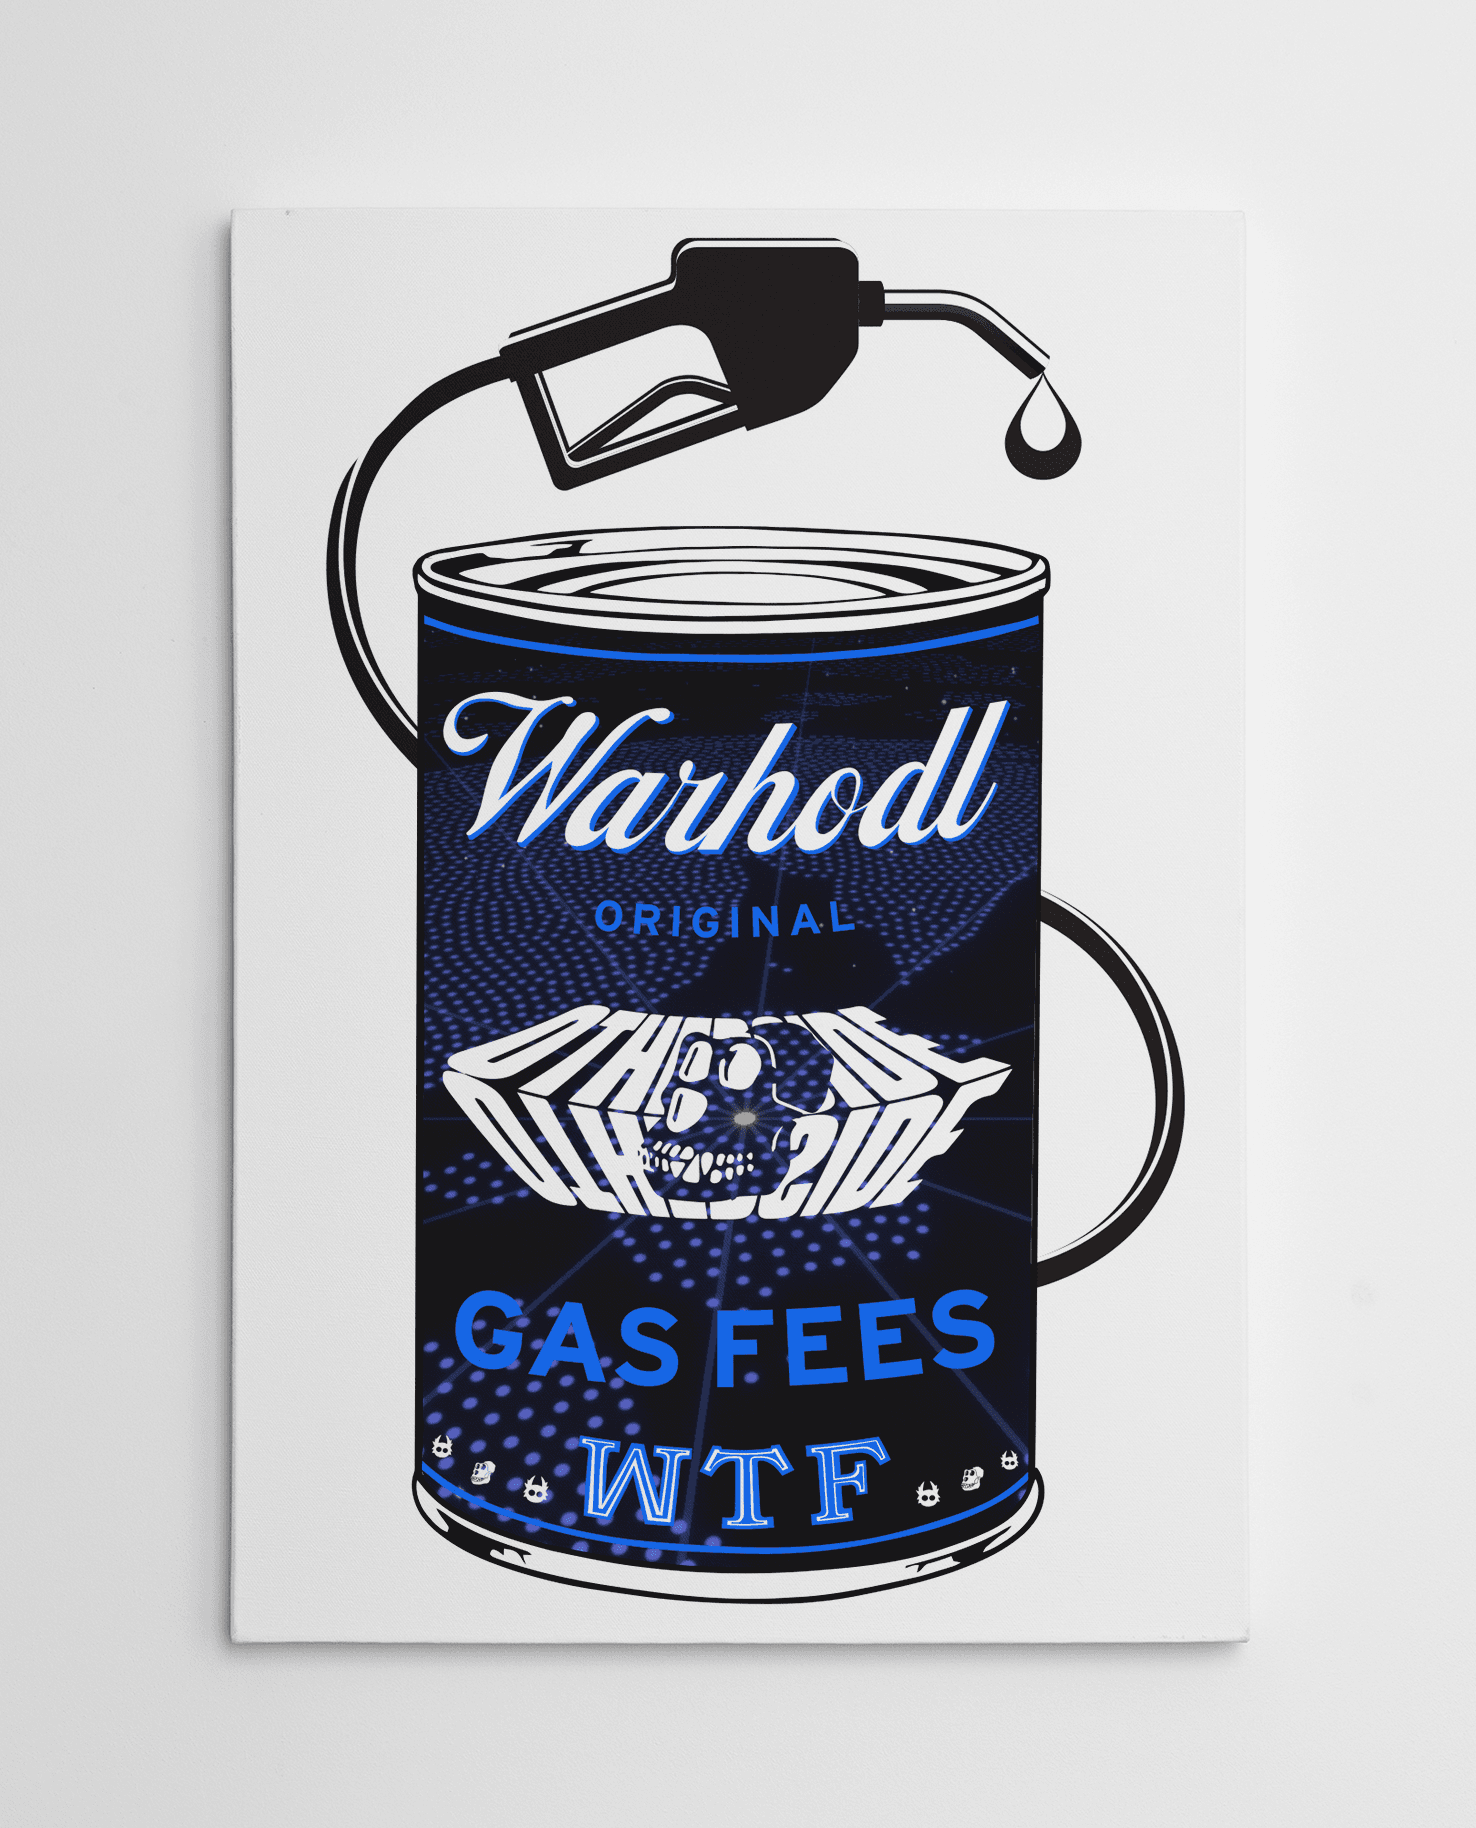 WARHODL Artist Proof "GAS FEES WTF" Revised Soup can